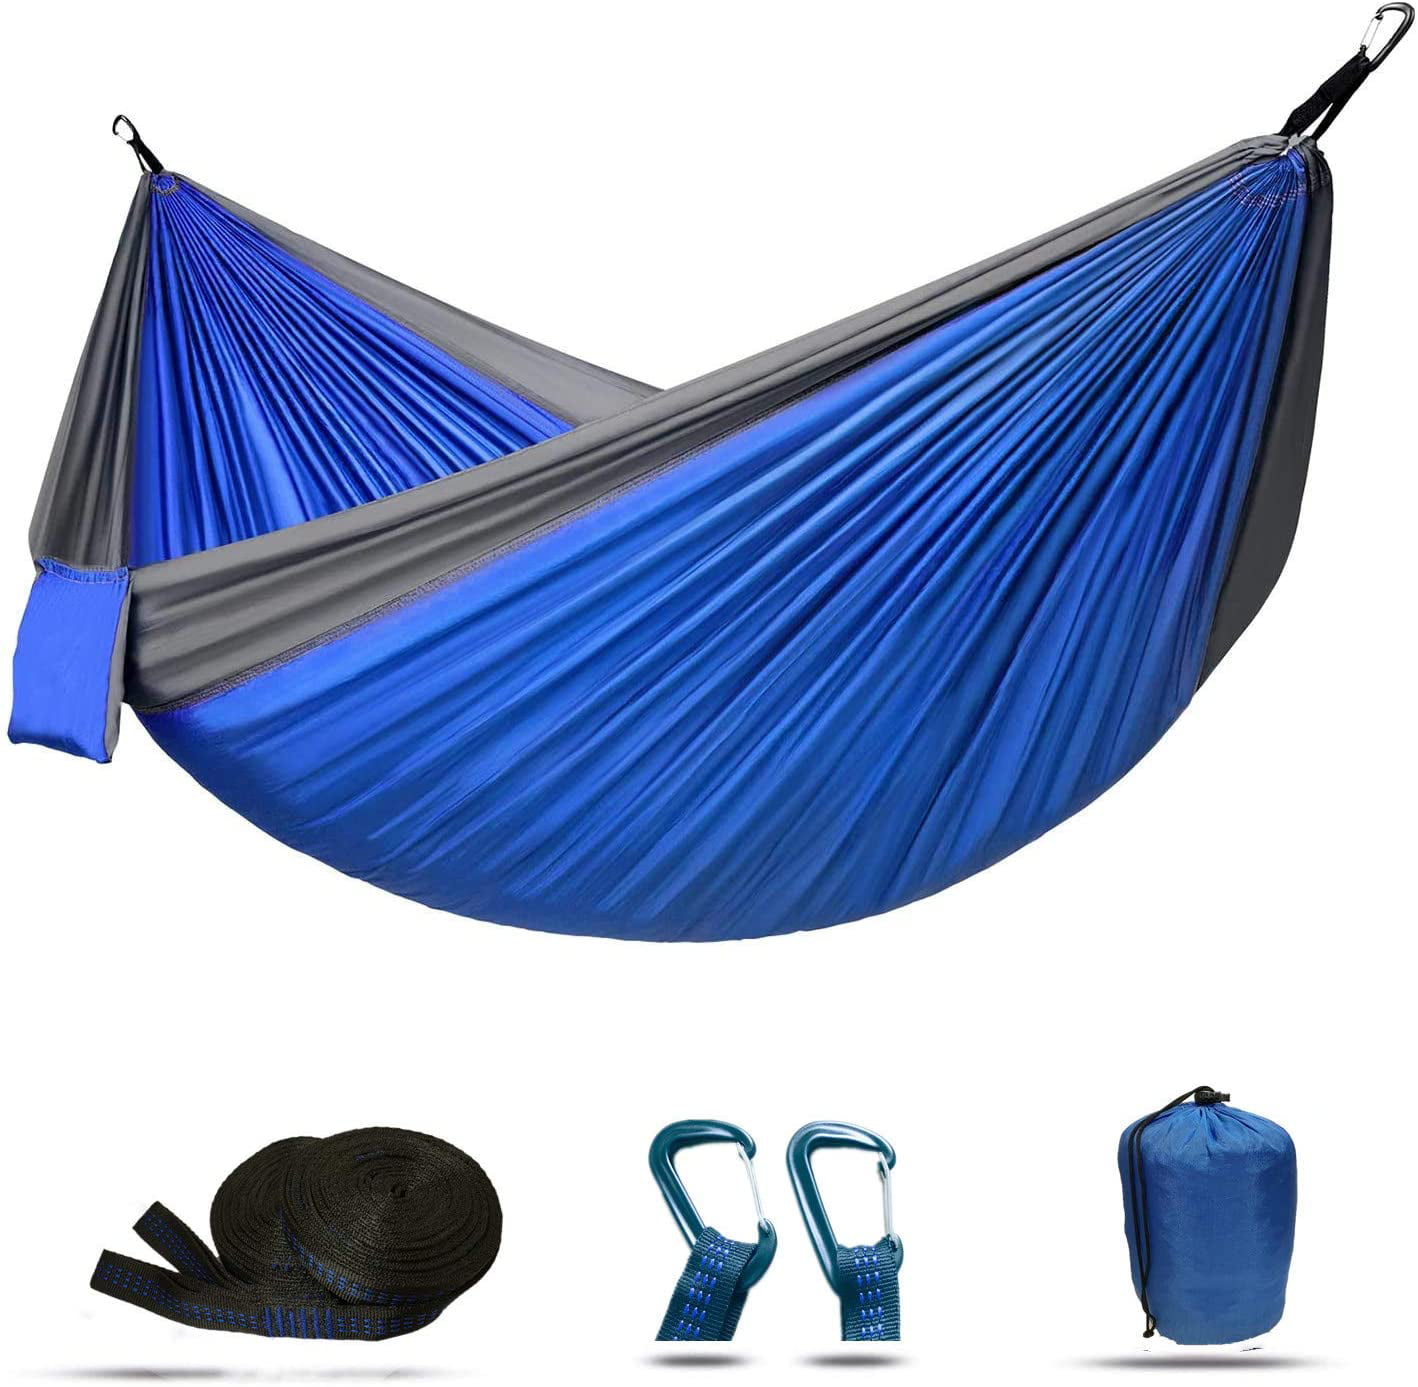 Beach W Yard Travel Camping x 78 L WINNER OUTFITTERS Double Camping Hammock 118 Lightweight Nylon Portable Hammock Best Parachute Double Hammock for Backpacking 